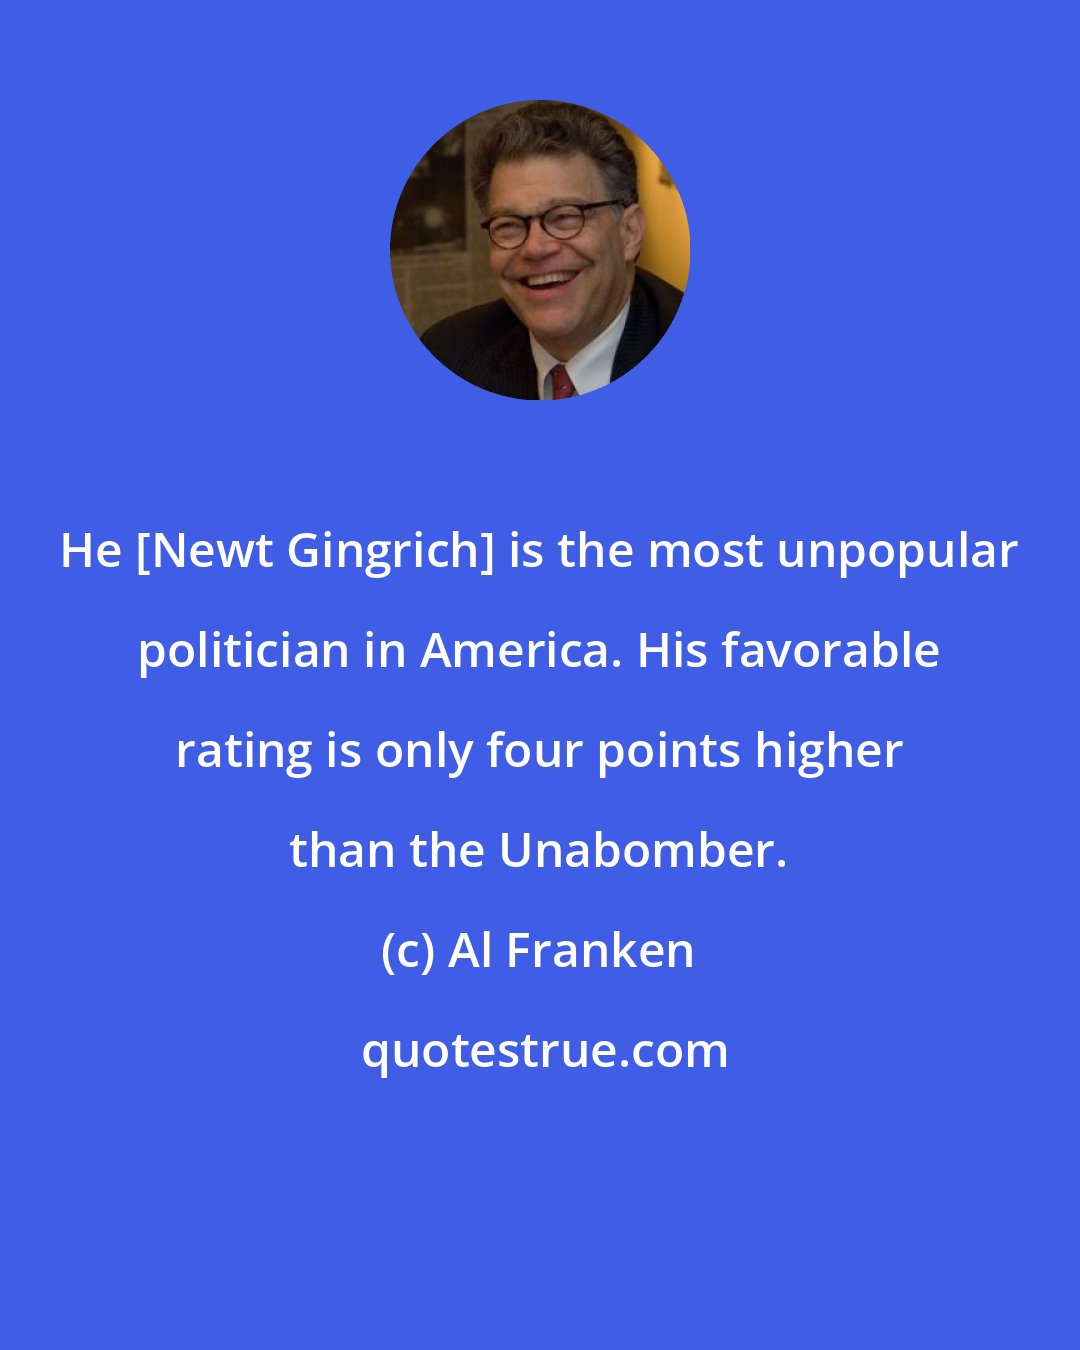 Al Franken: He [Newt Gingrich] is the most unpopular politician in America. His favorable rating is only four points higher than the Unabomber.